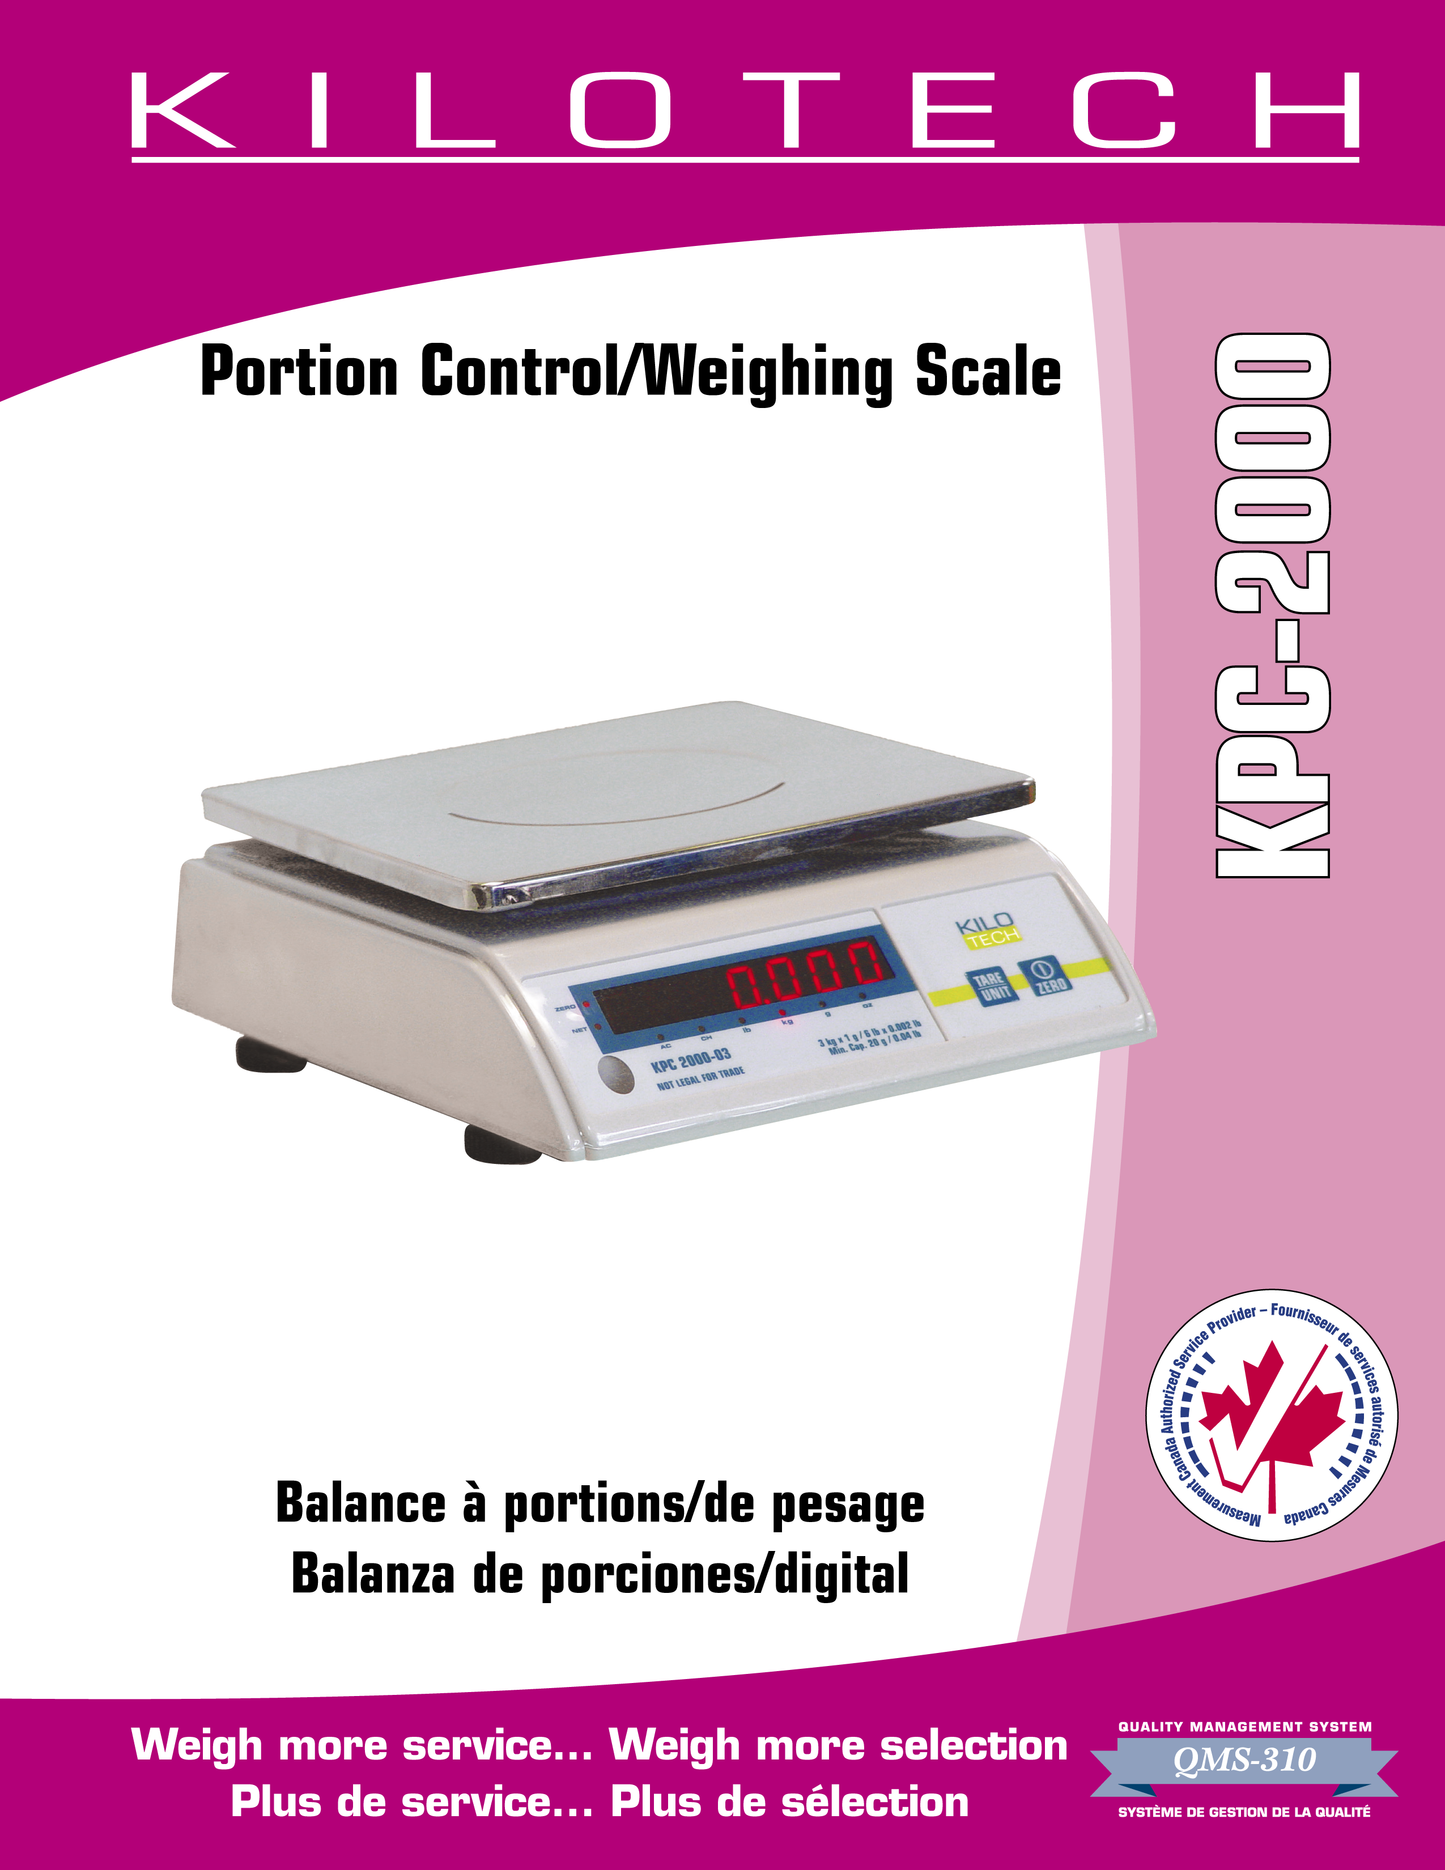 Portion Control Scale